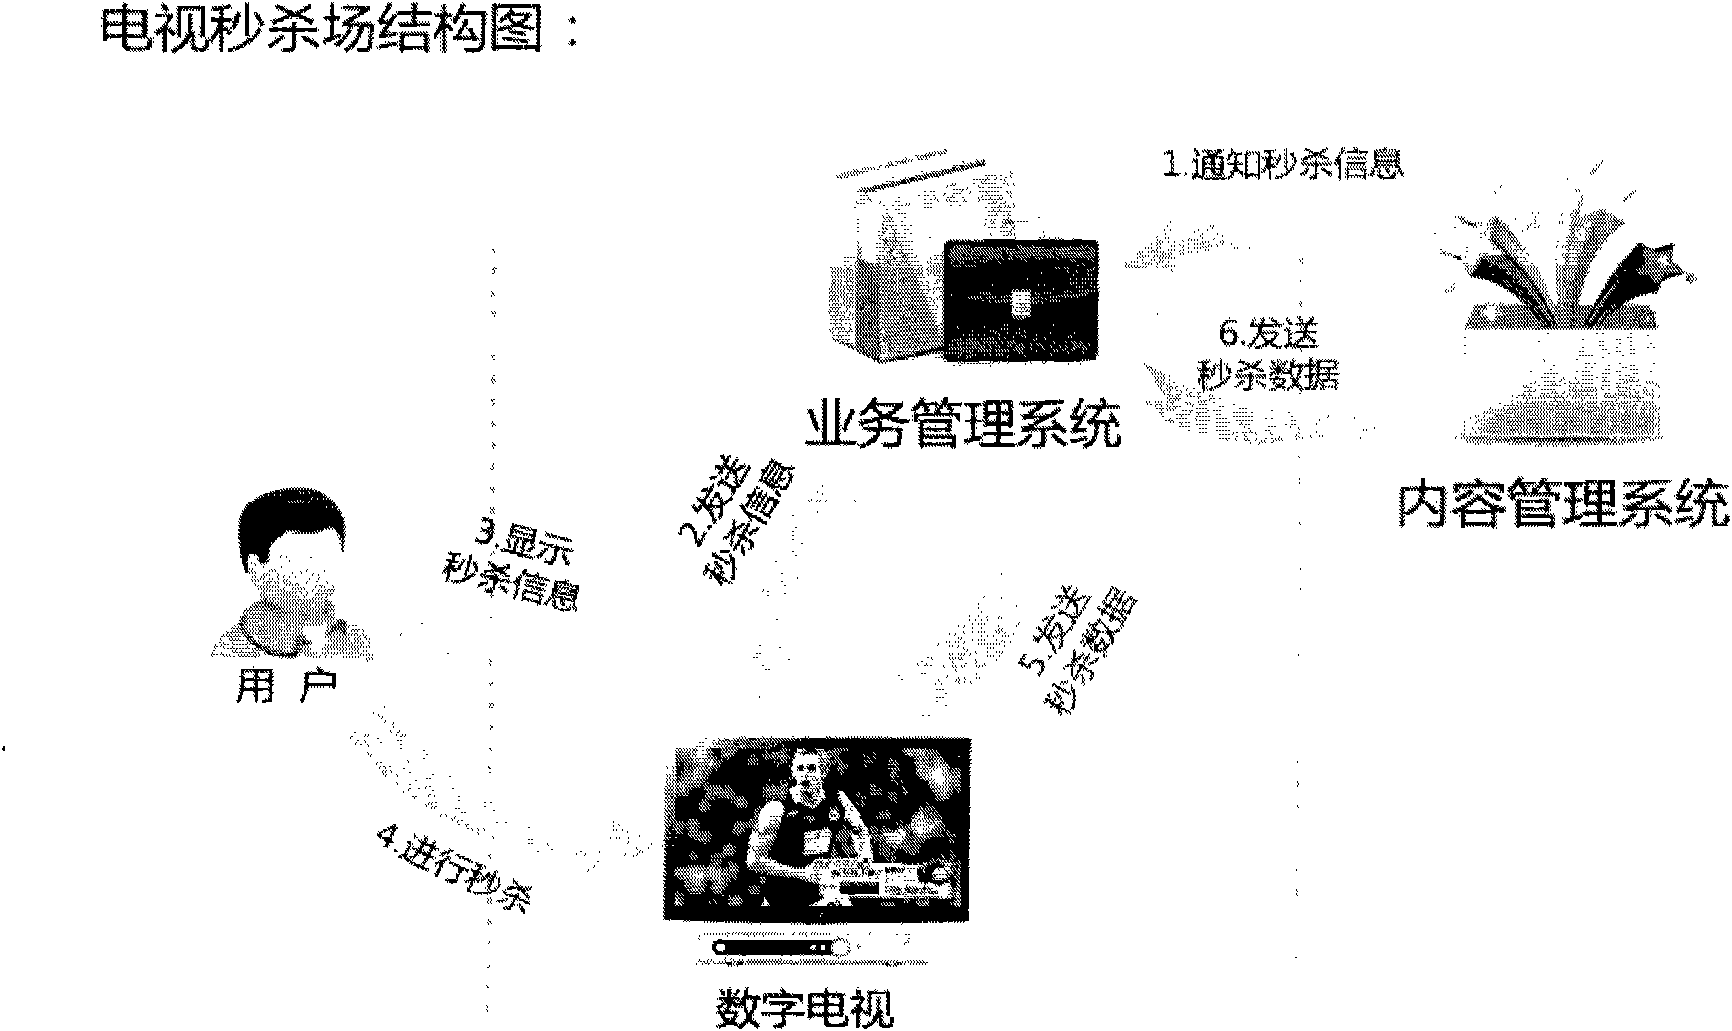 System, digital television terminal, device and method for realizing commodity order